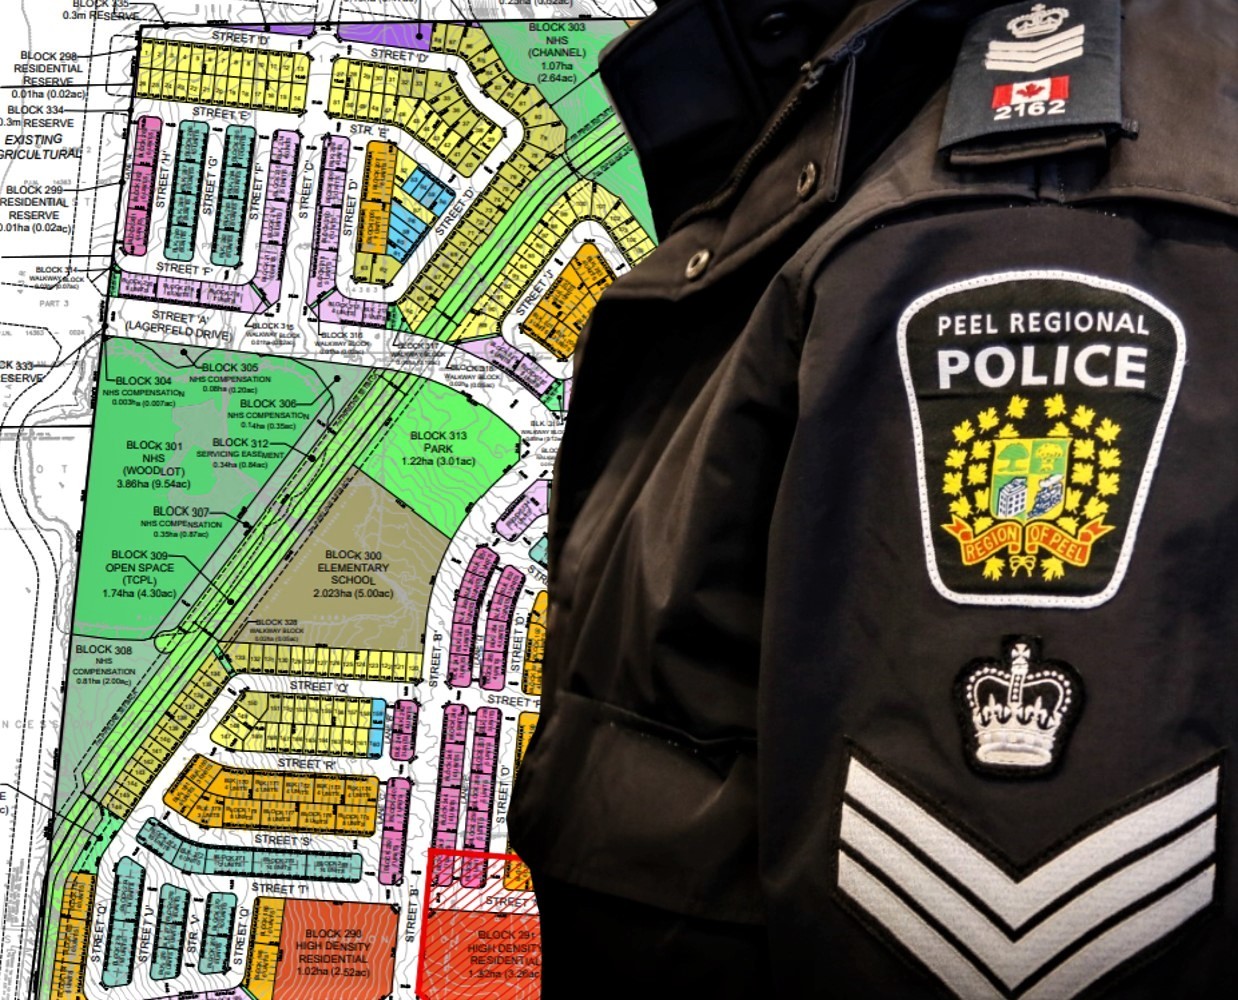 Developer invokes new Peel Police division to bypass local planning for large Brampton subdivision